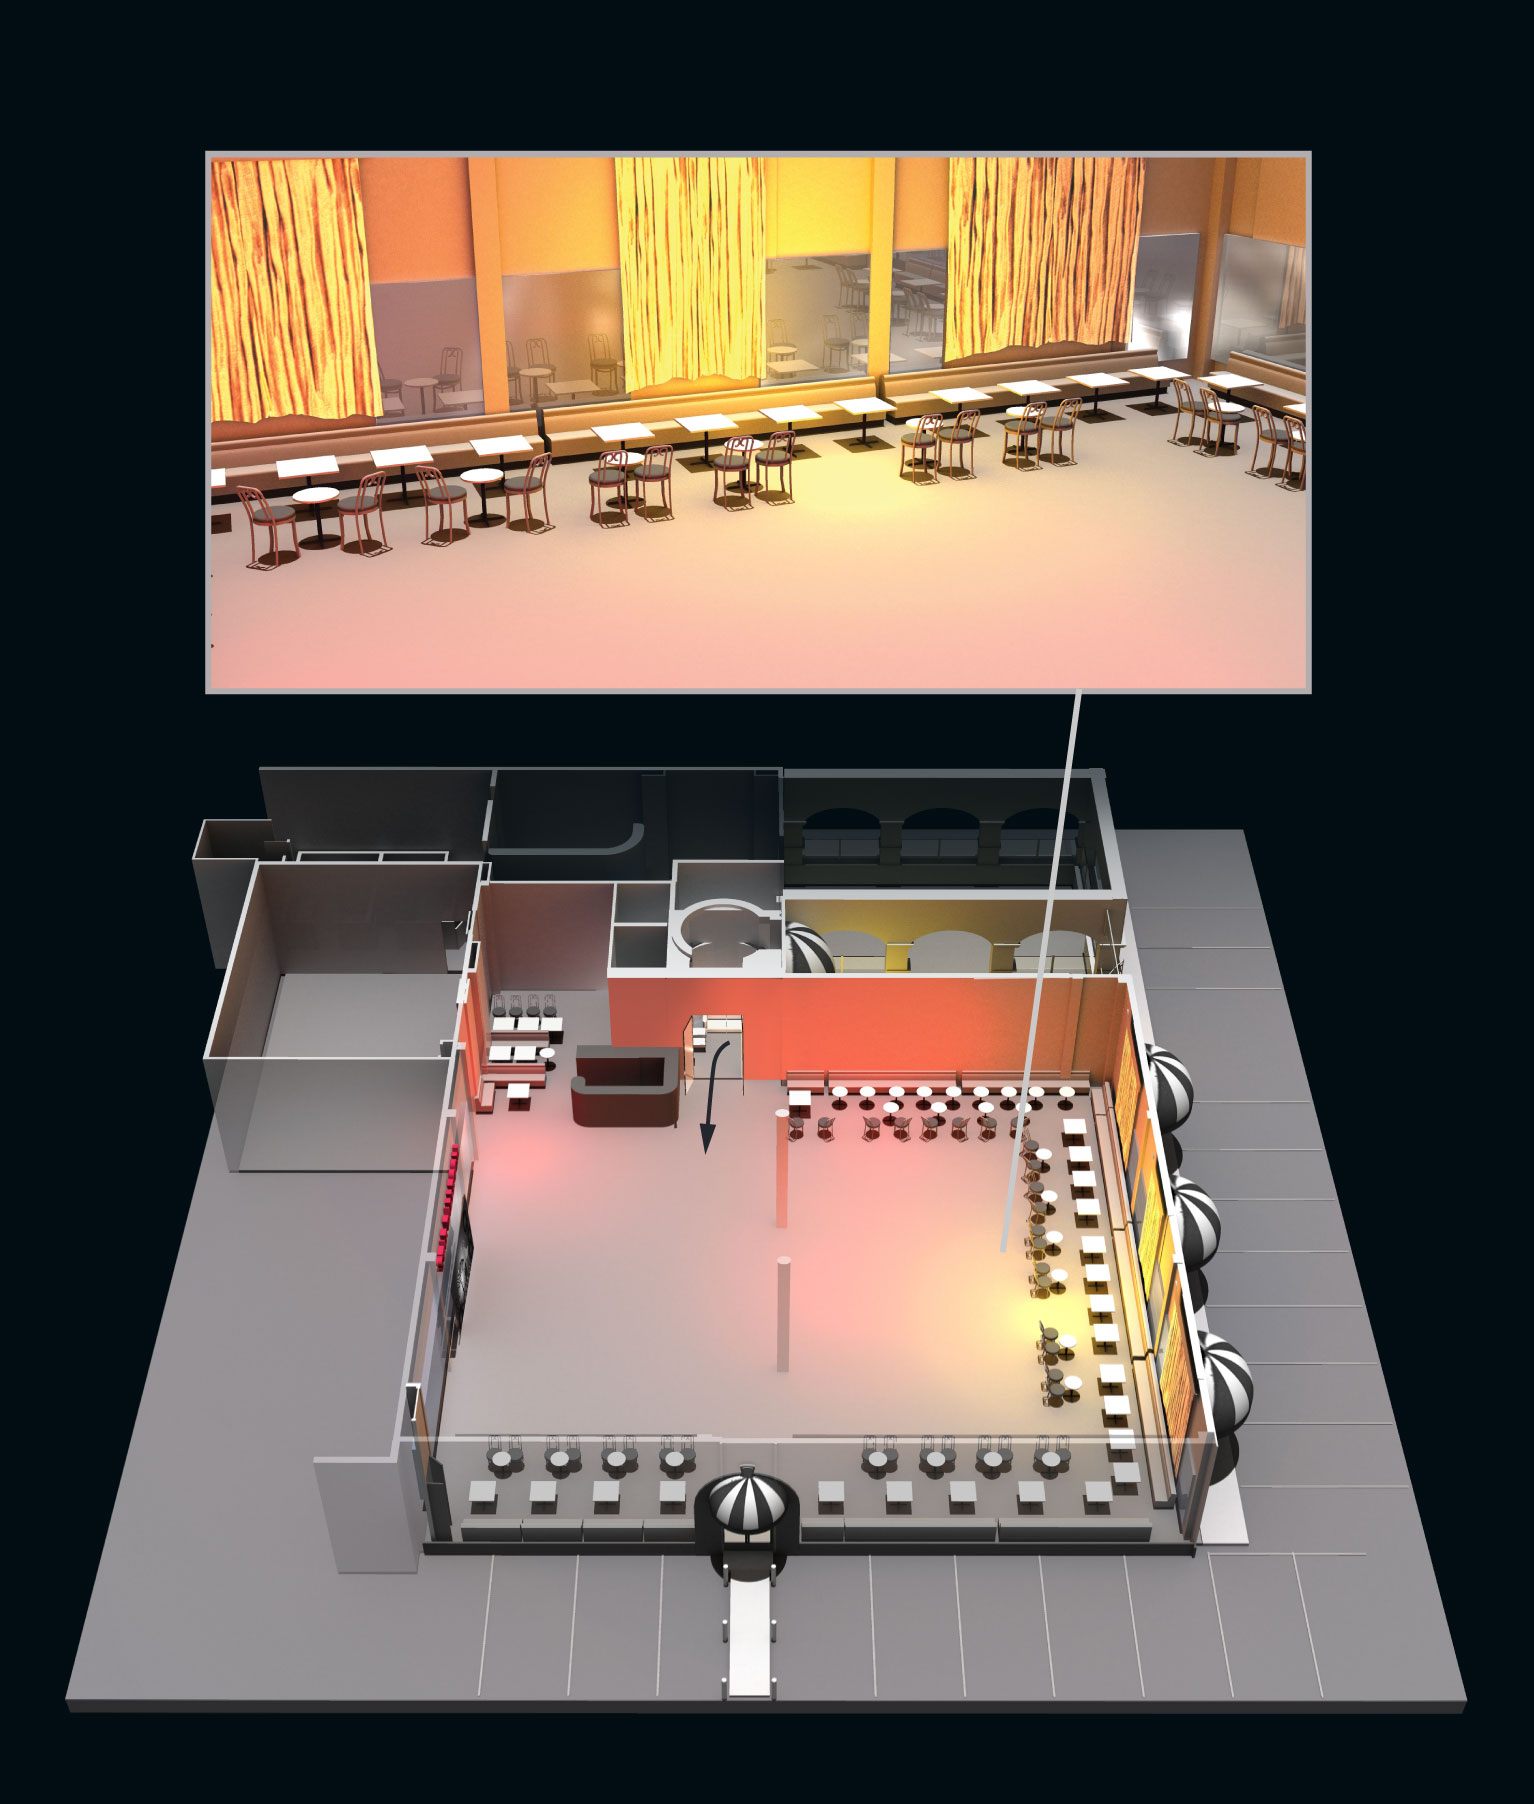 A diagram showing the layout of Star Ballroom and where the gunman entered the room. Shally sat nearthe south wall. When the gunman began shooting, some people fled out of the west exit while others hid under tables.